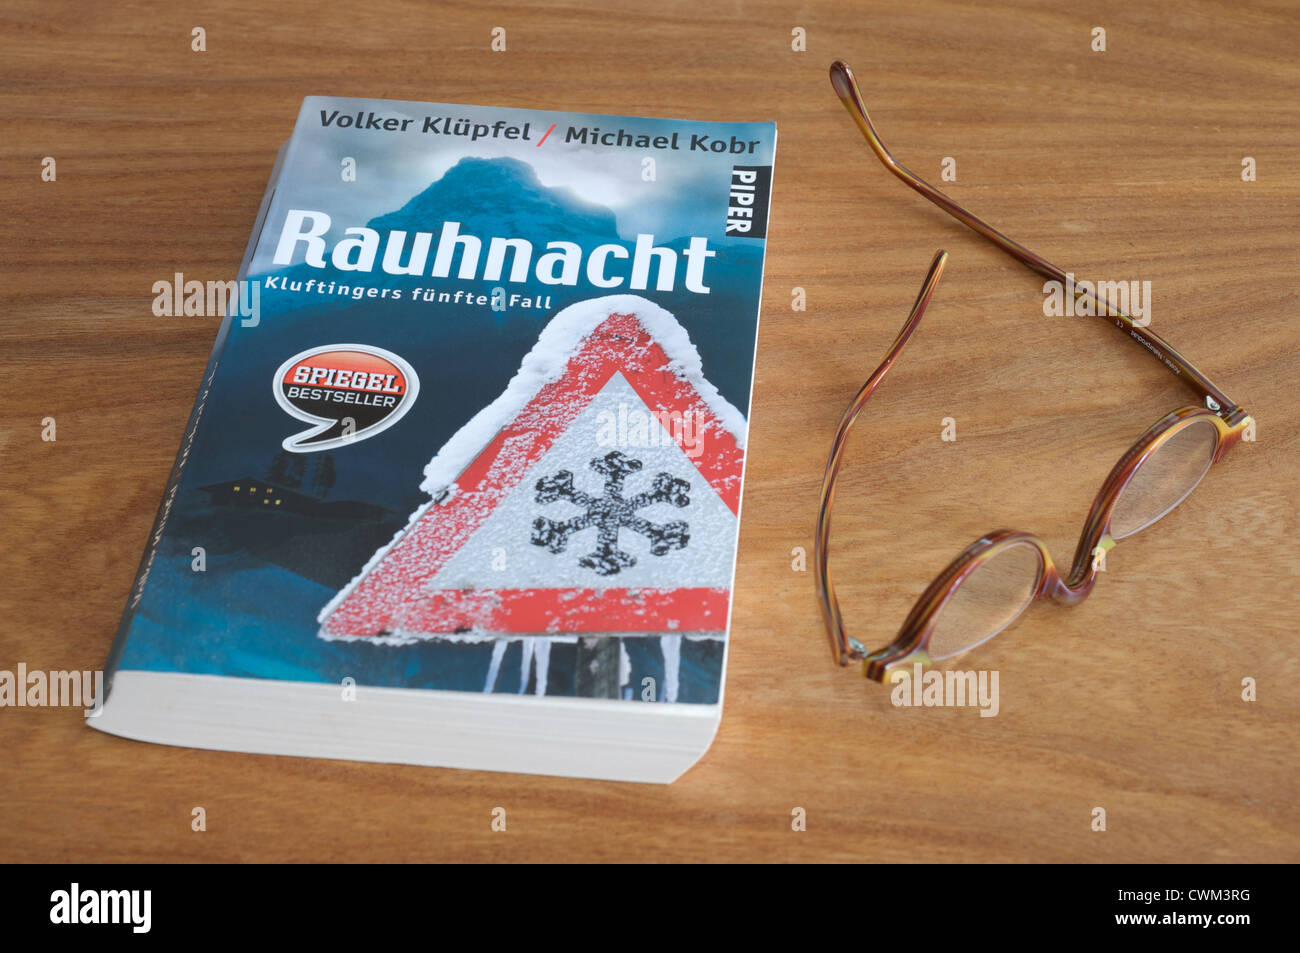 Rauhnacht a Spiegel Best Seller paperback book by Volker Klupfel and  Michael Kobr Stock Photo - Alamy